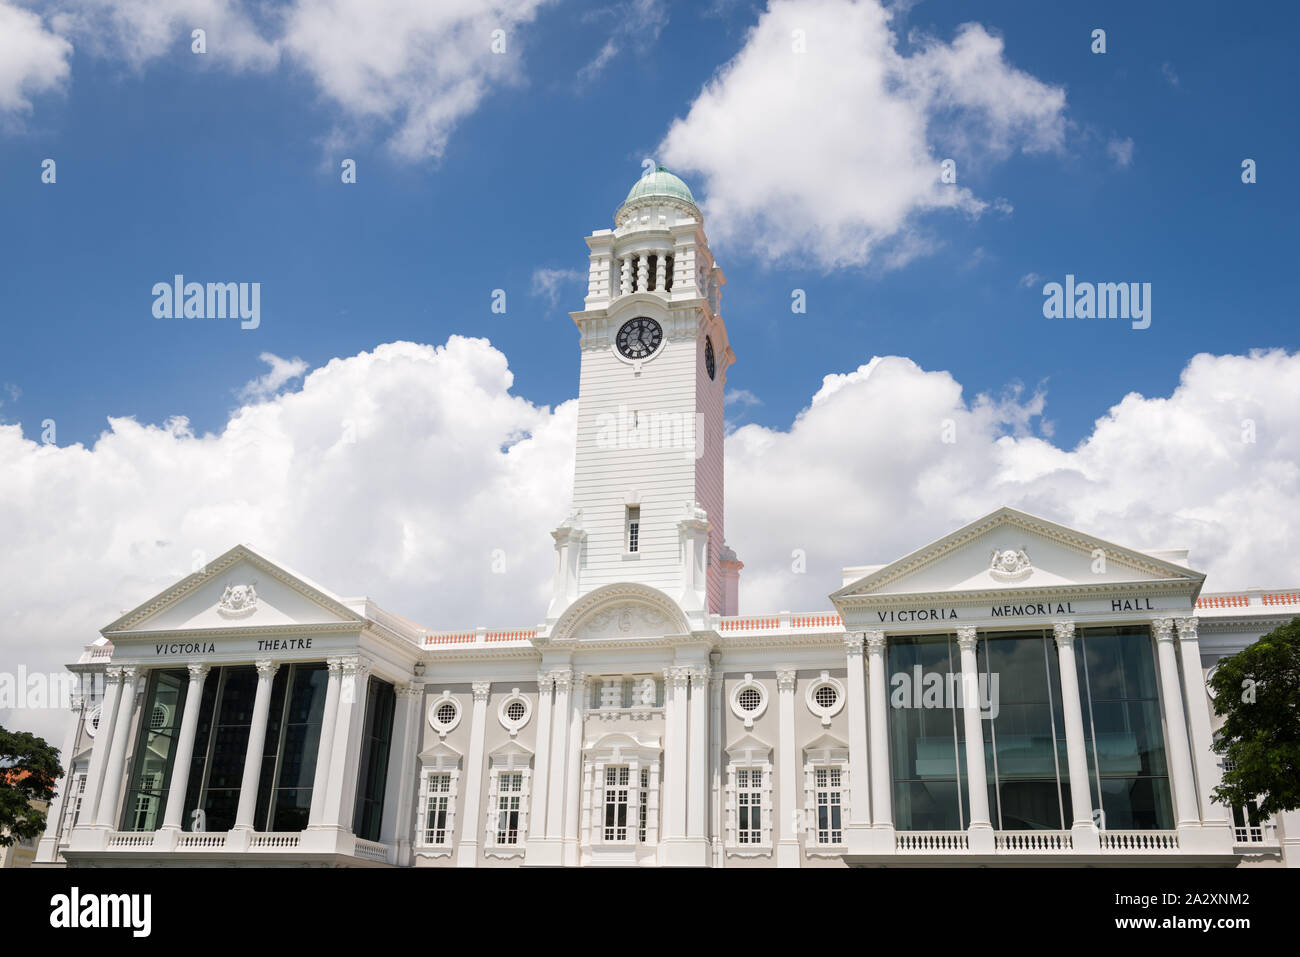 Singapore, 23 Feb 2016: Newly restored and renovated Victoria Concert Hall with iconic clock tower. Stock Photo